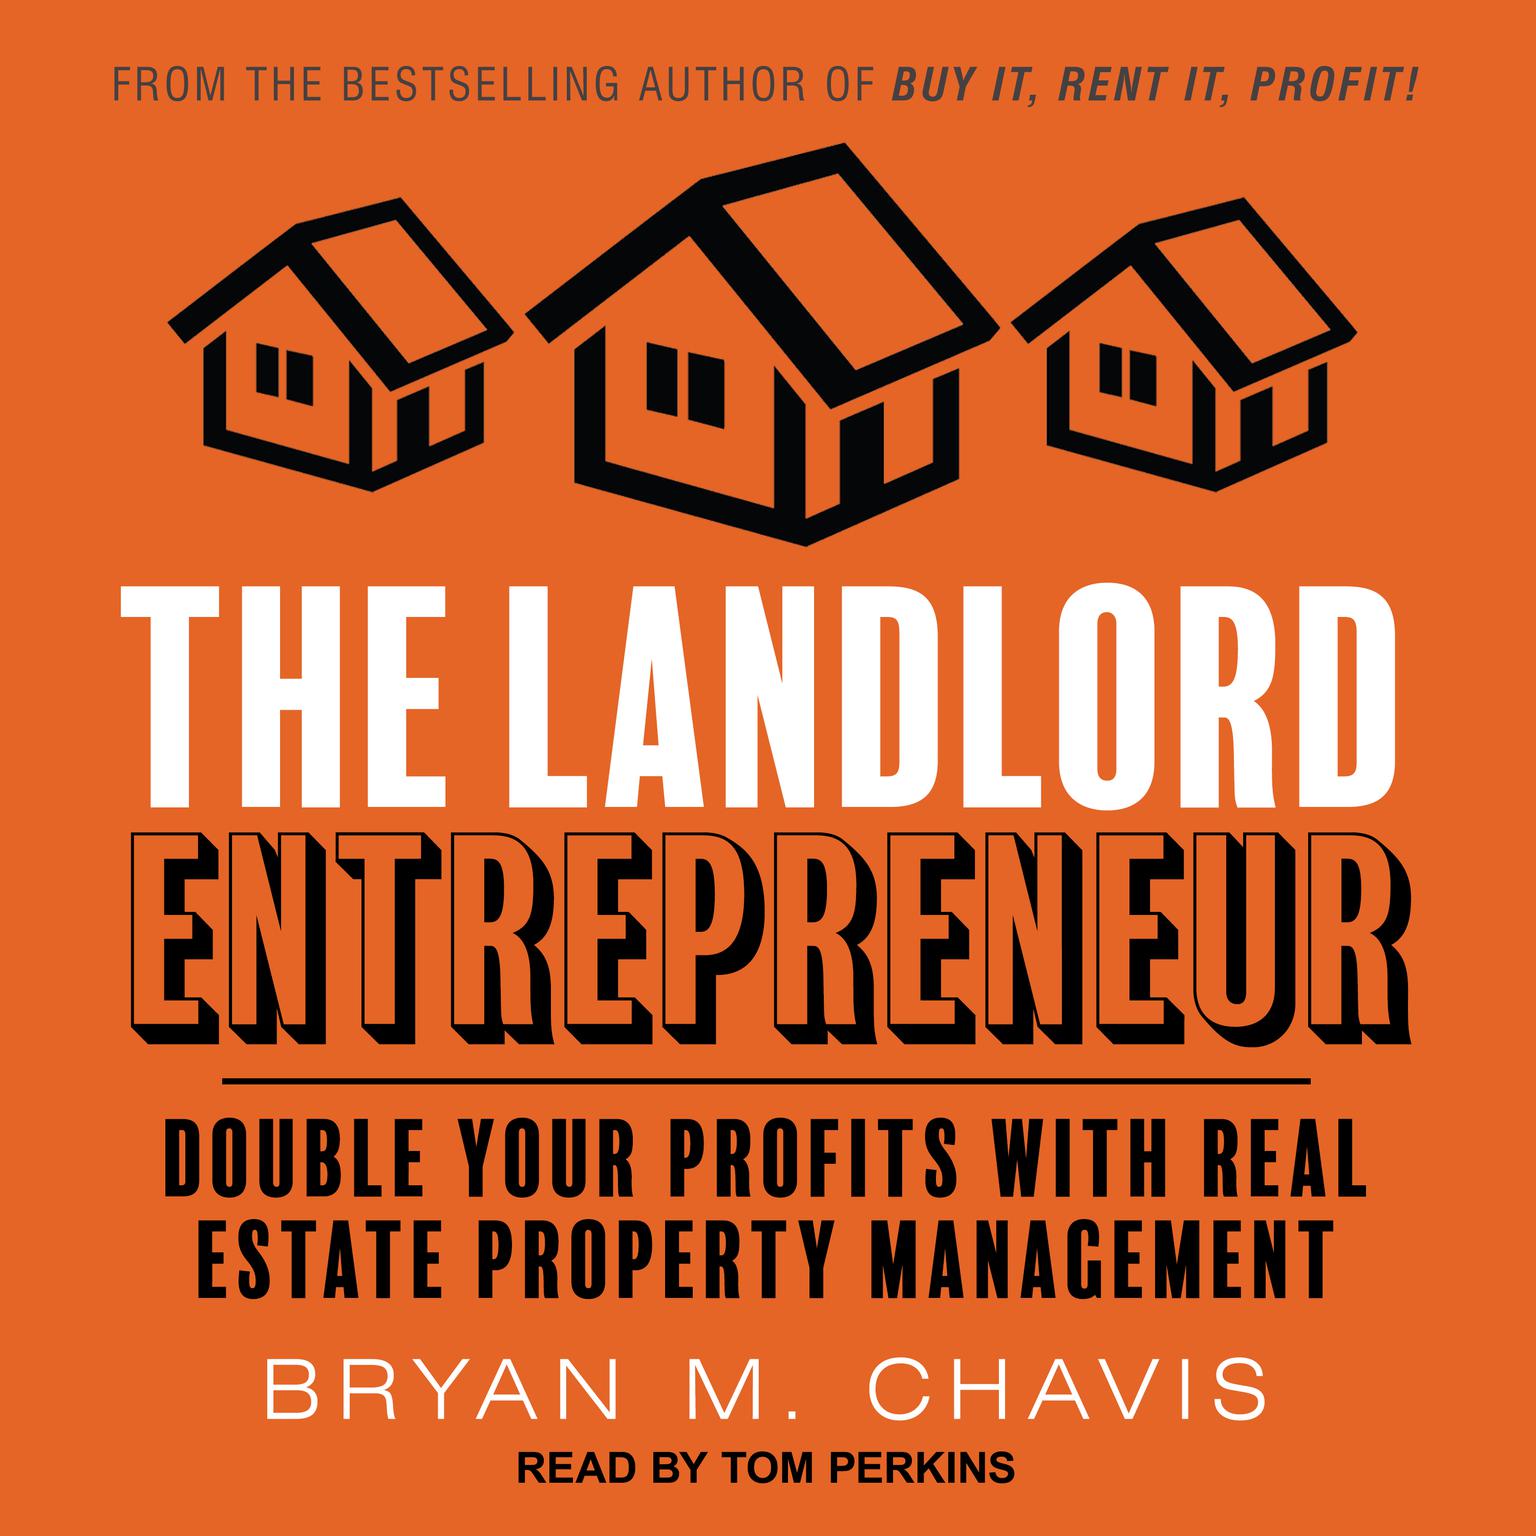 The Landlord Entrepreneur: Double Your Profits with Real Estate Property Management Audiobook, by Bryan M. Chavis